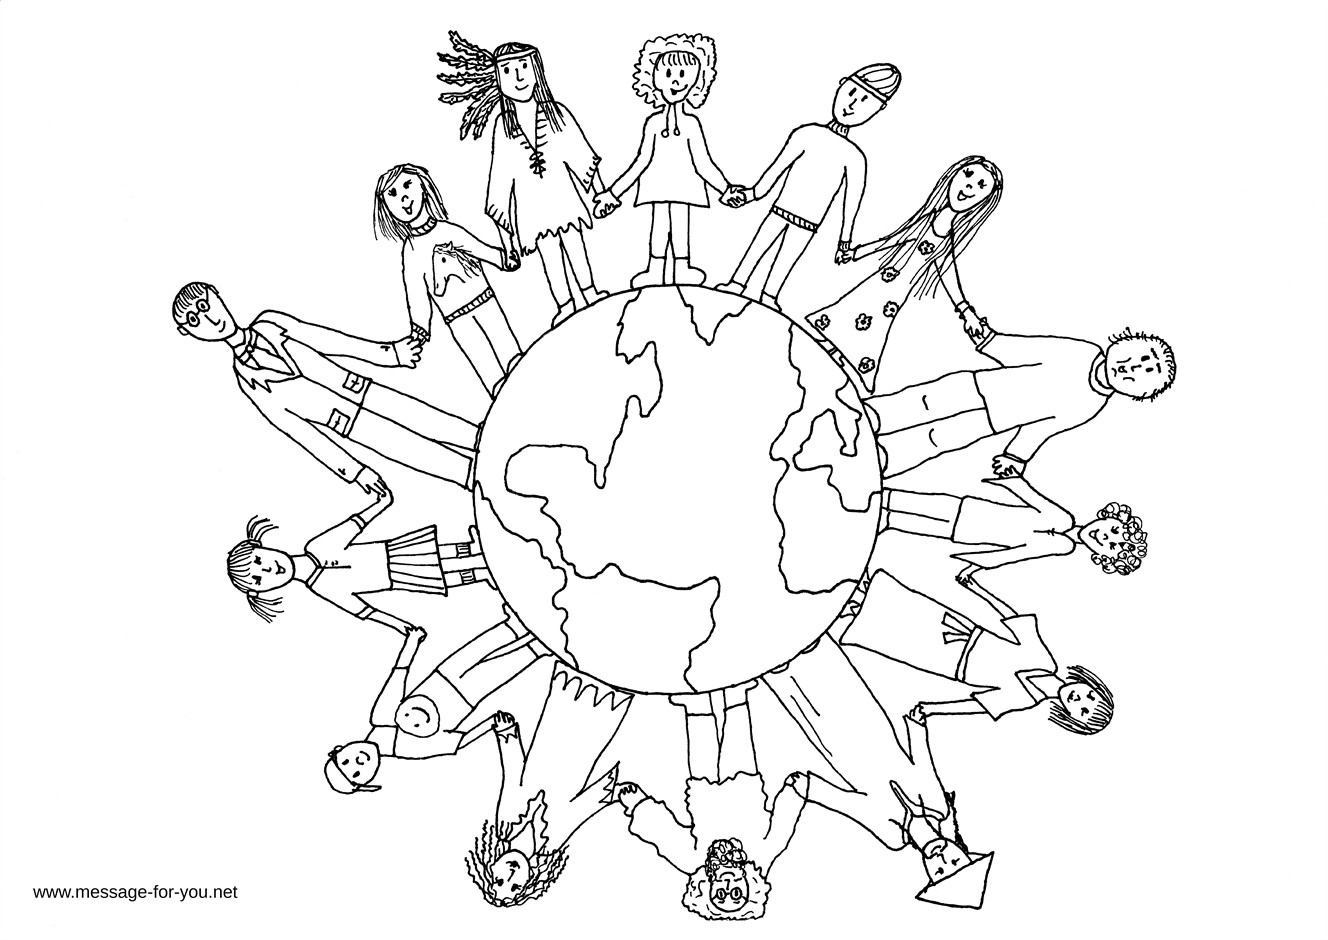 Children Of The World Coloring Pages
 Children The World Coloring Pages Bestofcoloring